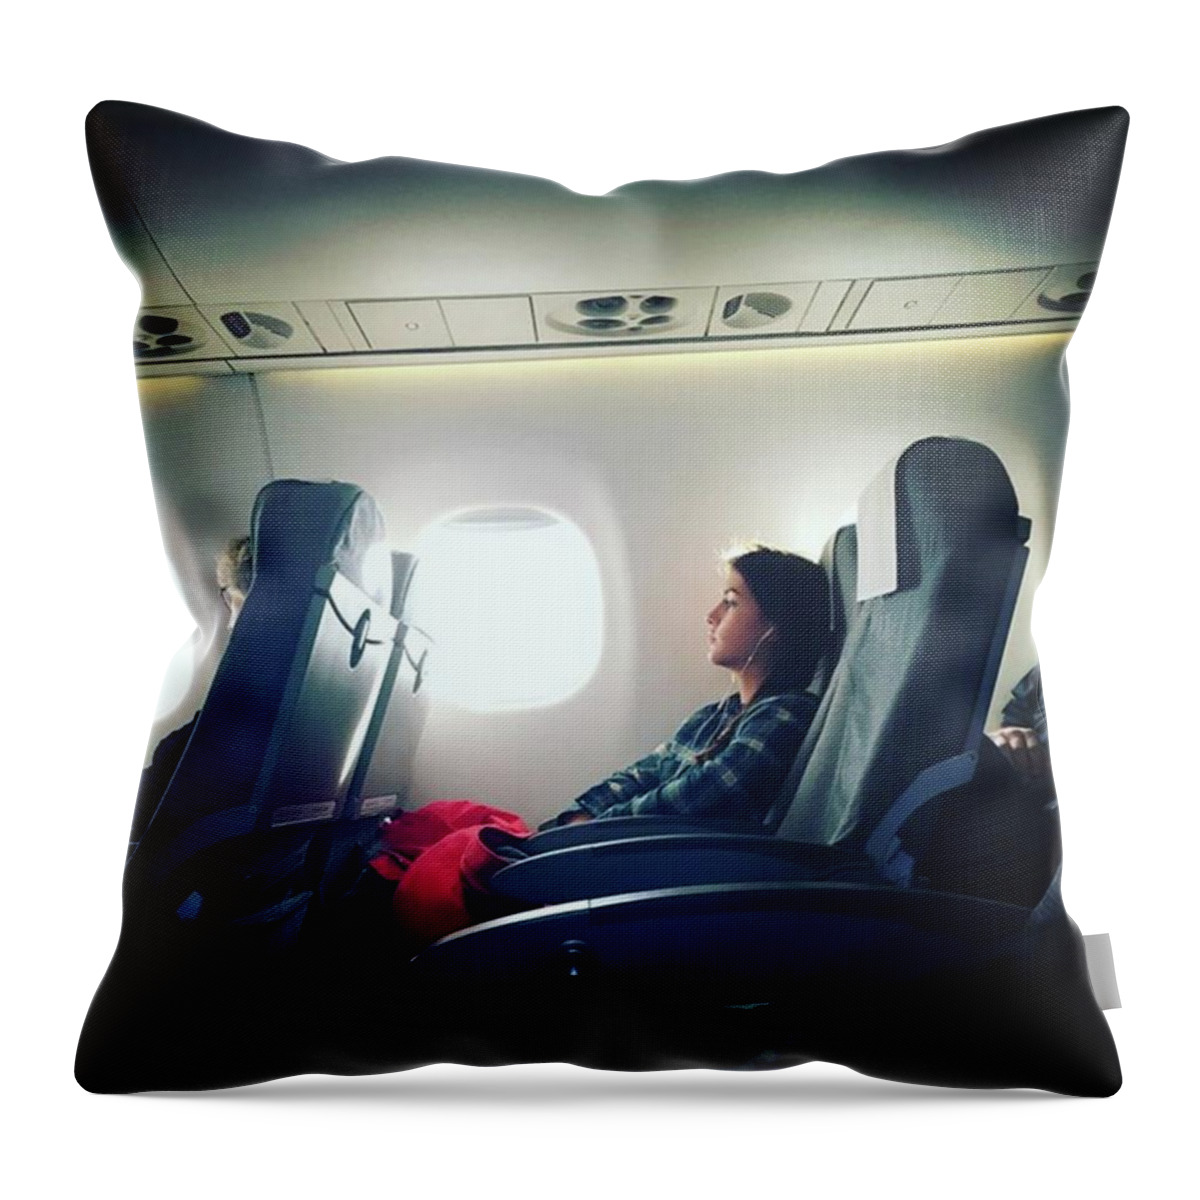 Finland Throw Pillow featuring the photograph Air Travel by Aleck Cartwright